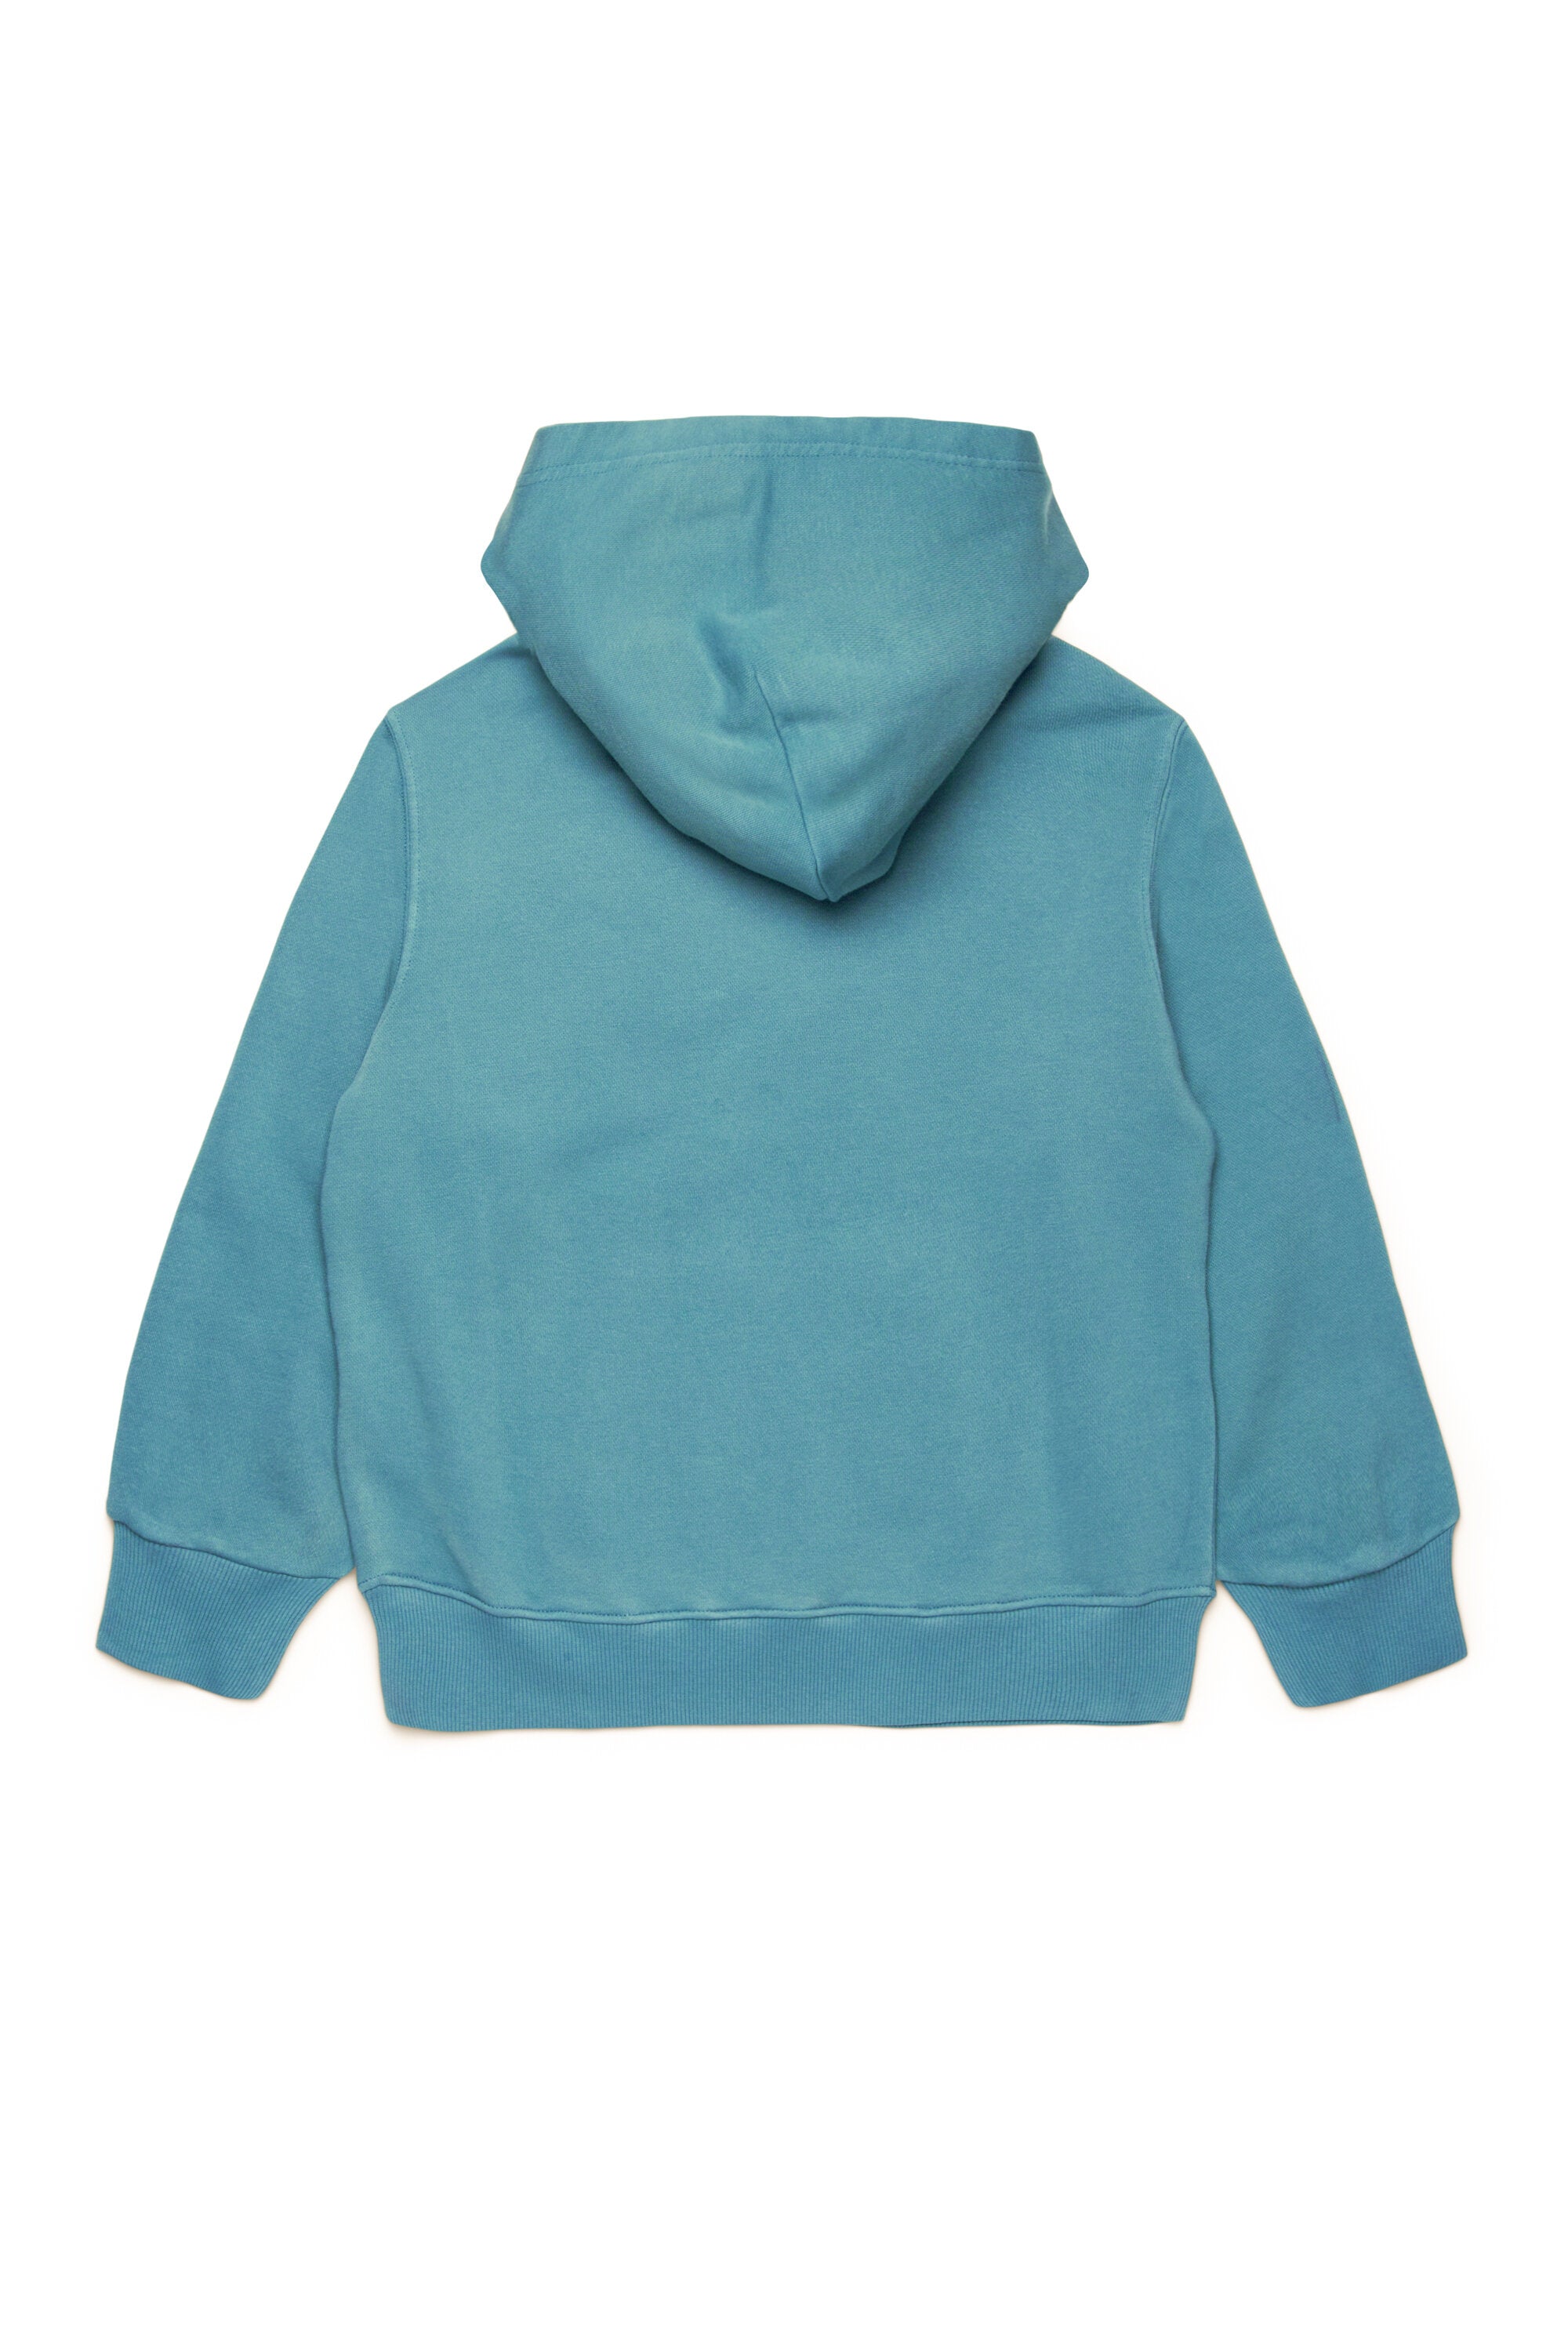 Hooded sweatshirt with sun-bleached effect and oval D logo